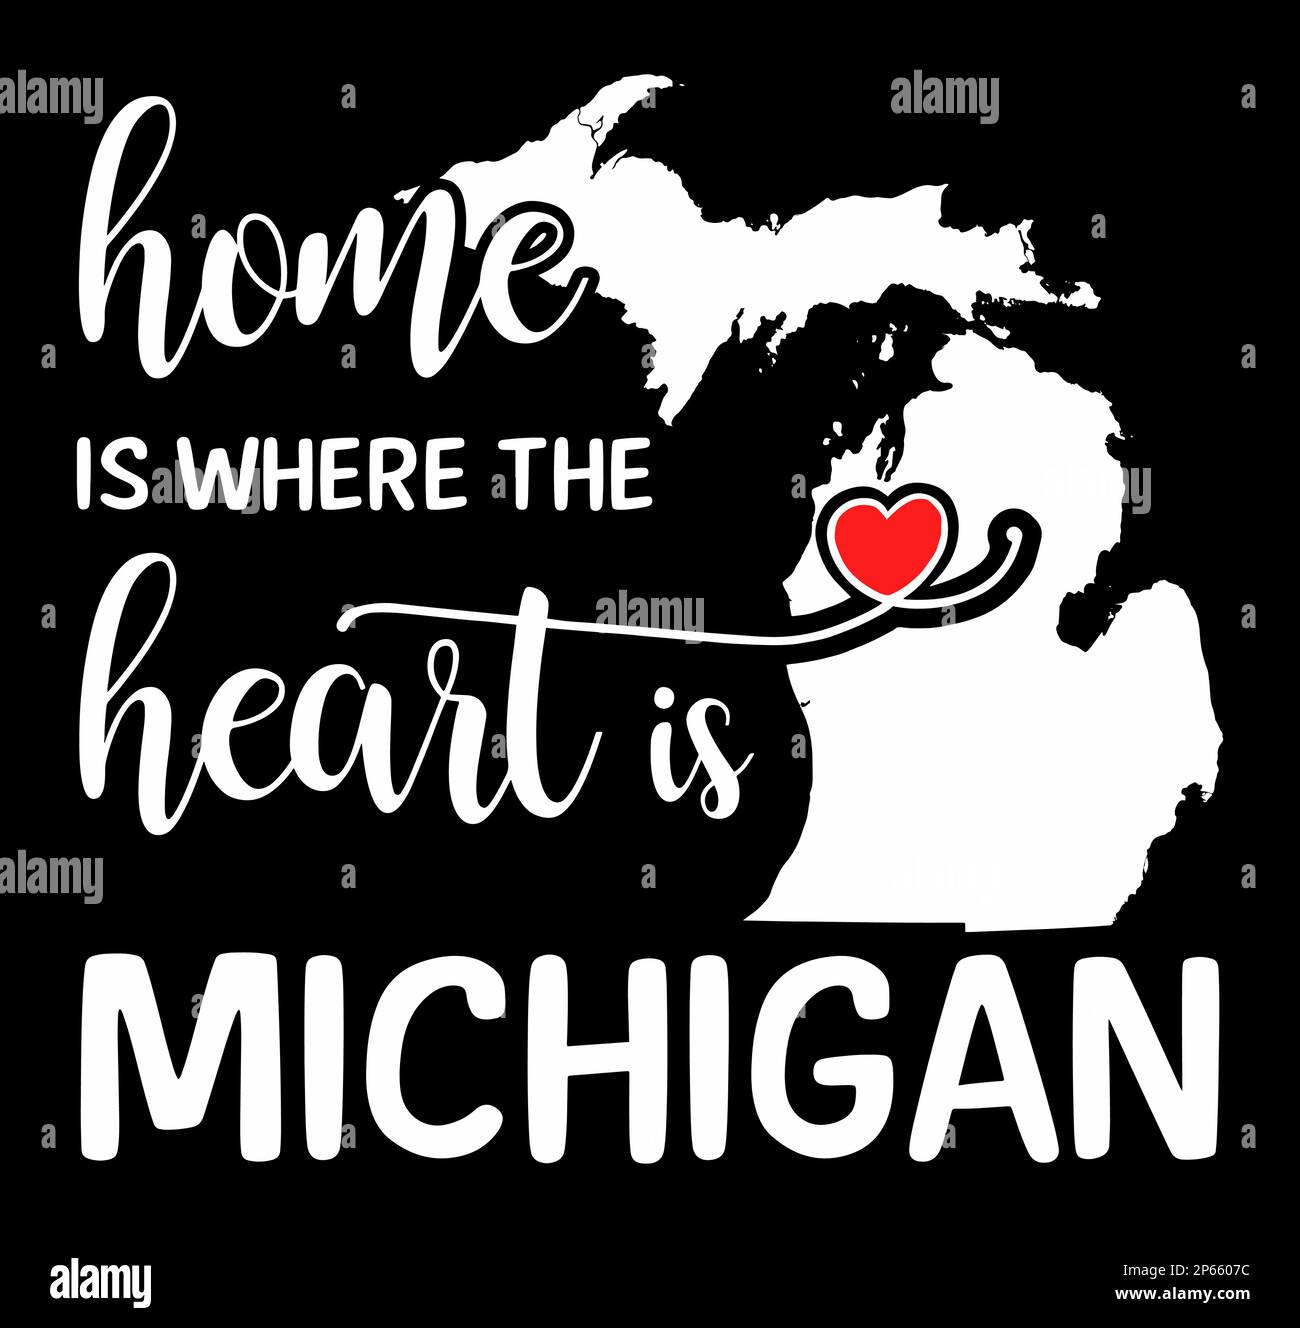 Home is where the heart is. US state Michigan. Stock Vector